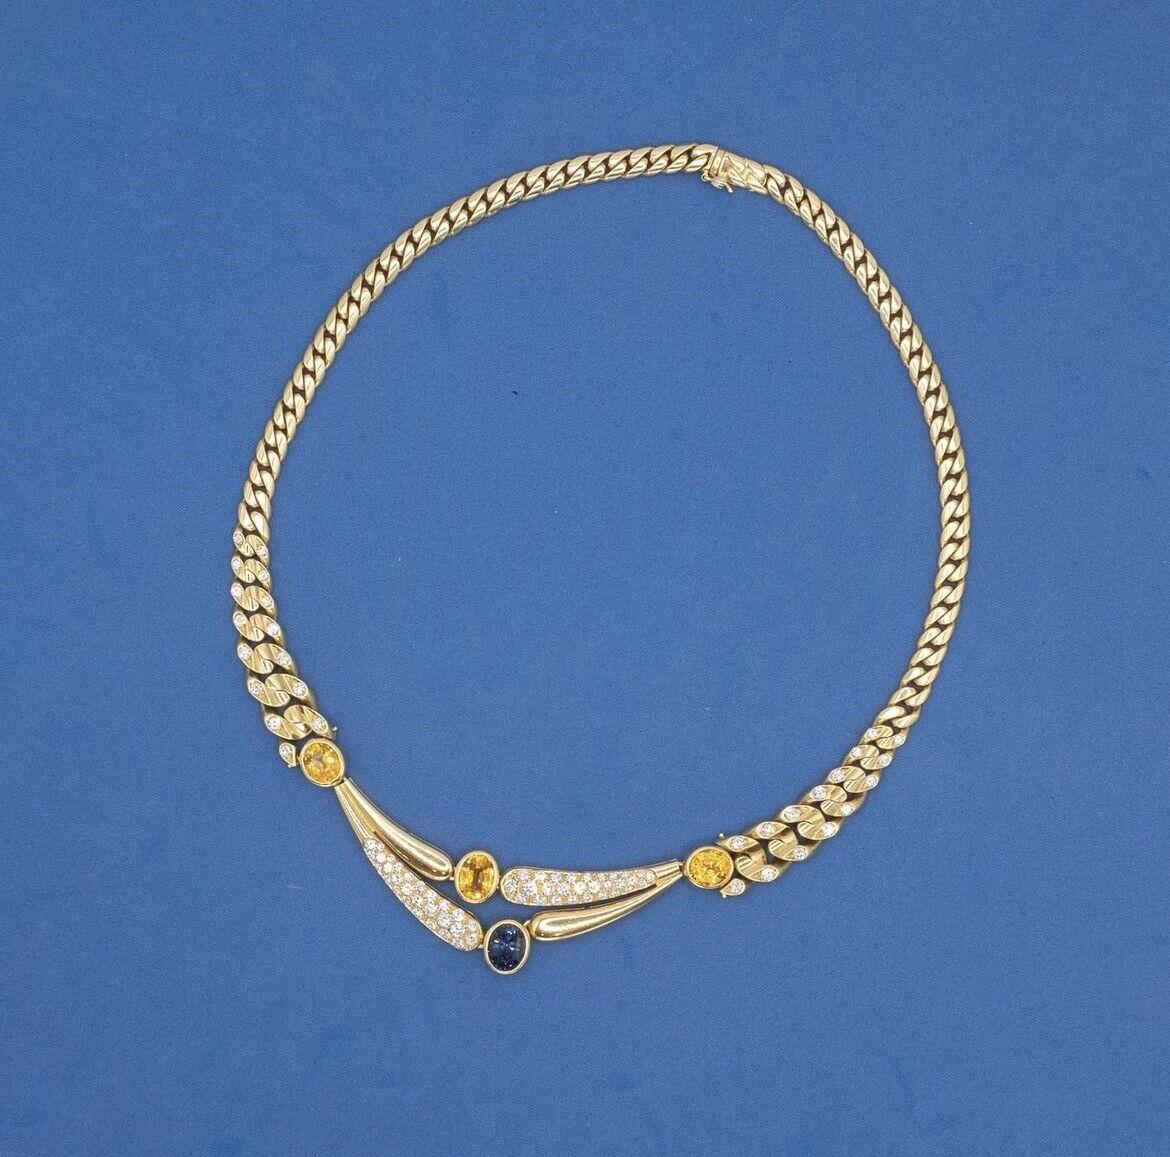 BVLGARI Italy 18k YG, Diamond, Blue & Yellow Sapphire Curb Link Necklace 1970s For Sale 1